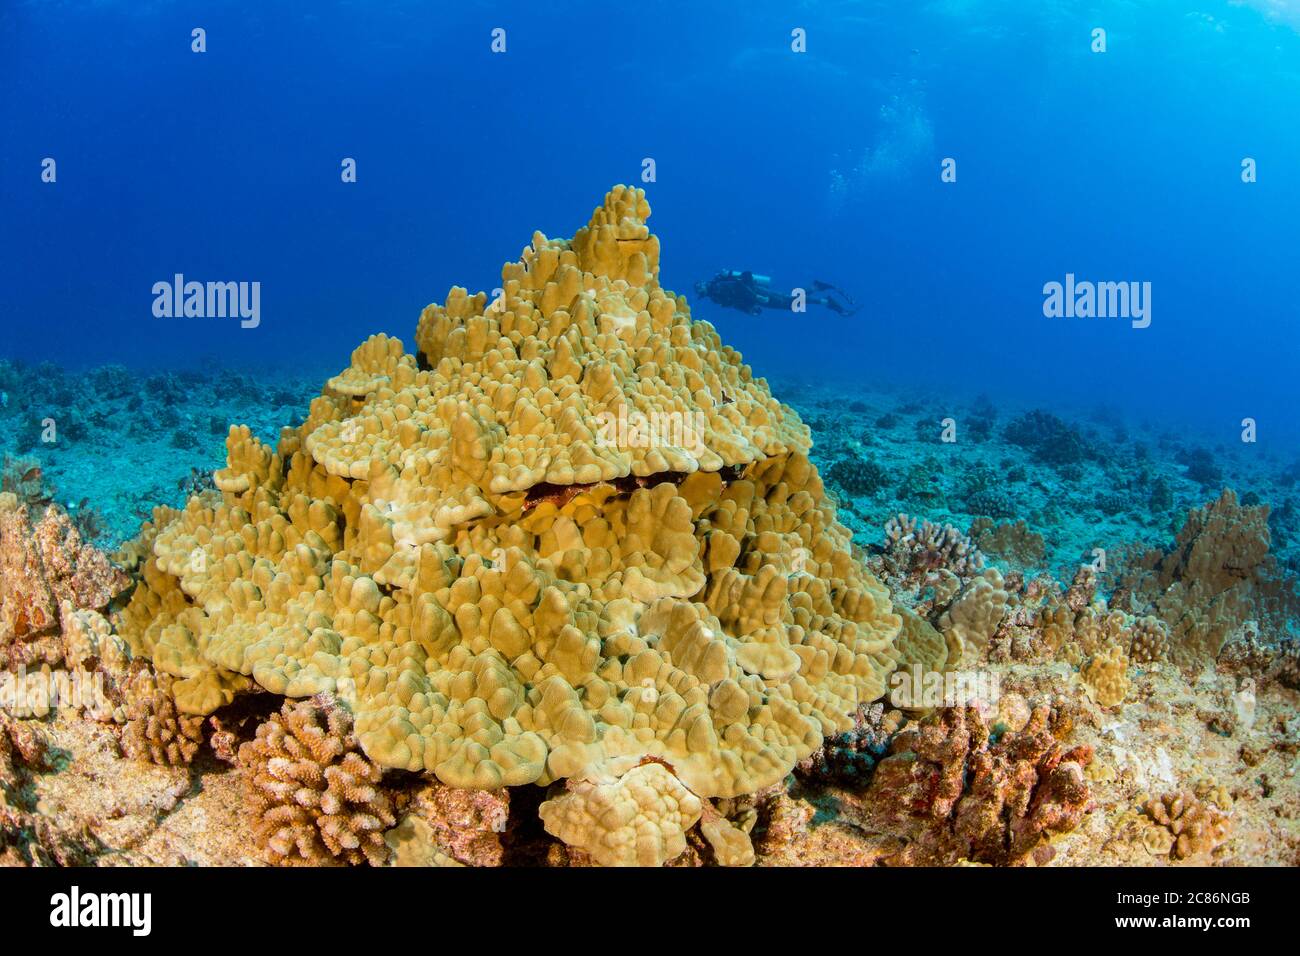 Lobe Coral, Porites lobata, is the most common of the hard corals found in Hawaii. Large colonies can be hundreds of years old. Stock Photo